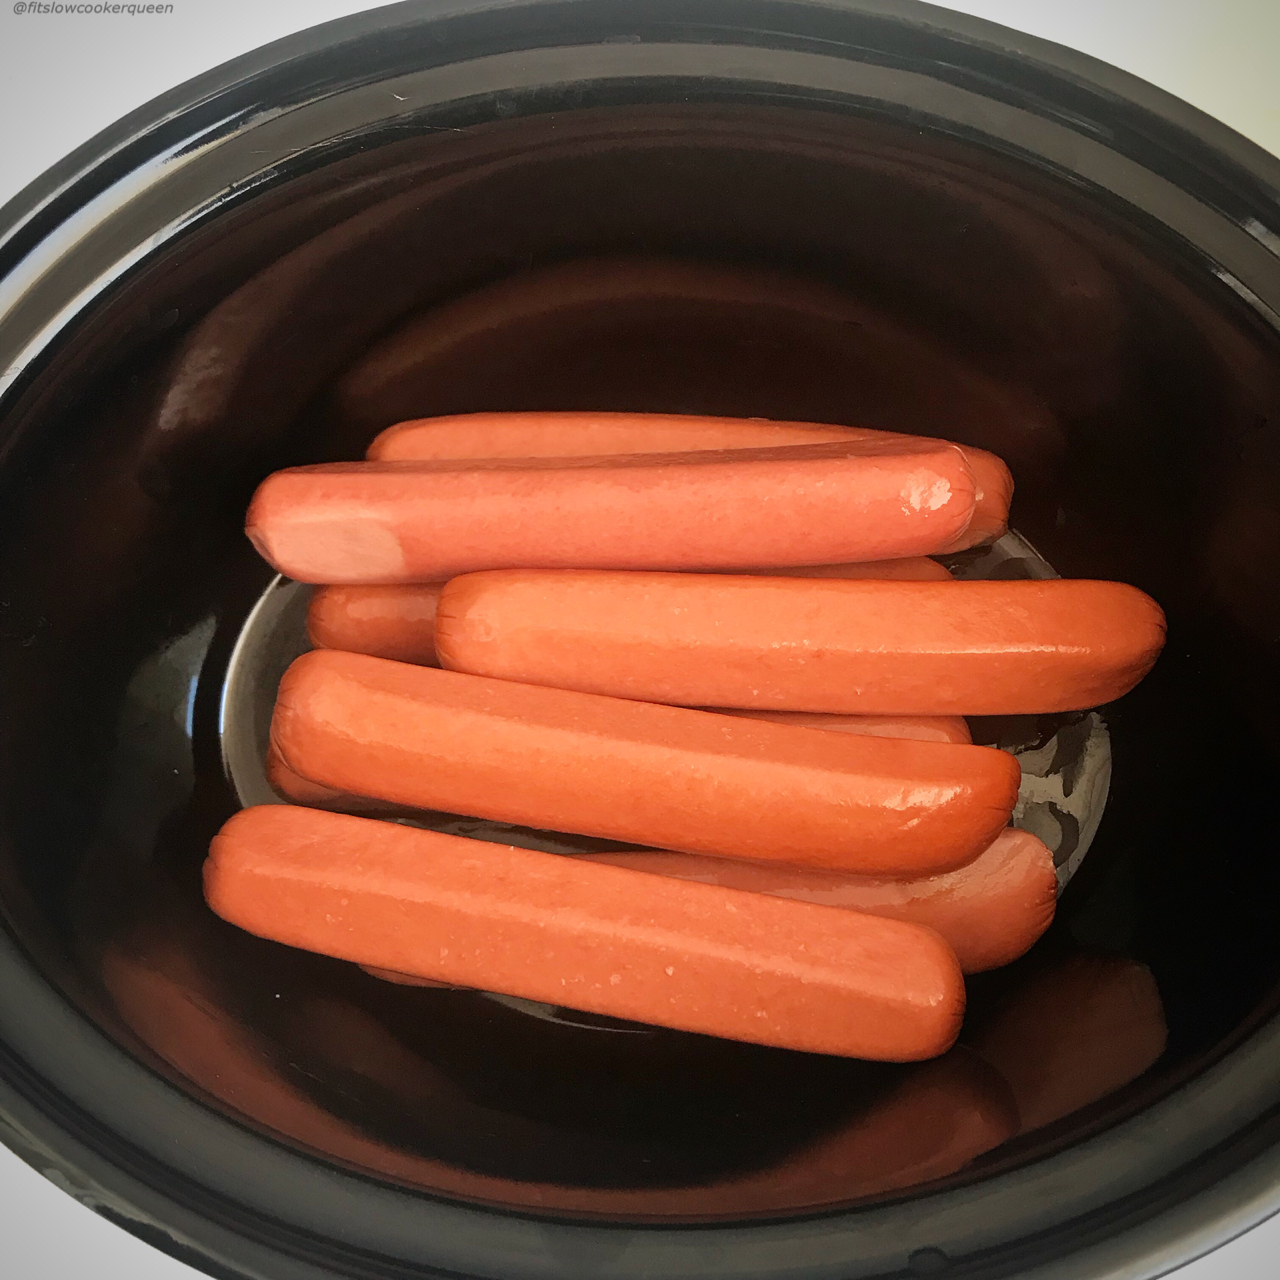 Crock Pot Hot Dogs for a Crowd - A Year of Slow Cooking